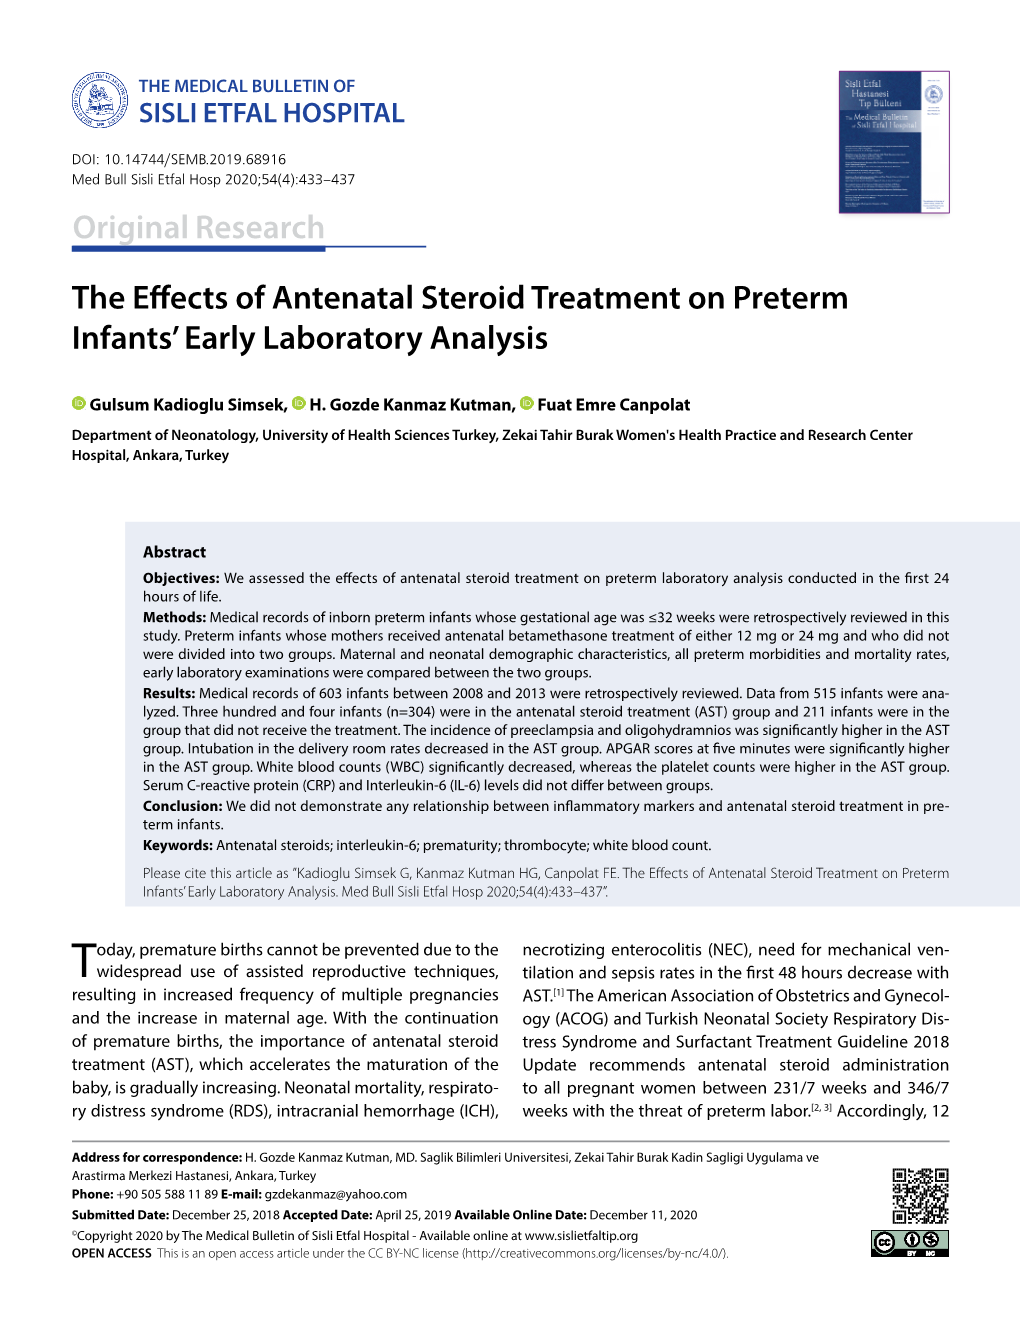 The Effects of Antenatal Steroid Treatment on Preterm Infants' Early Laboratory Analysis Original Research